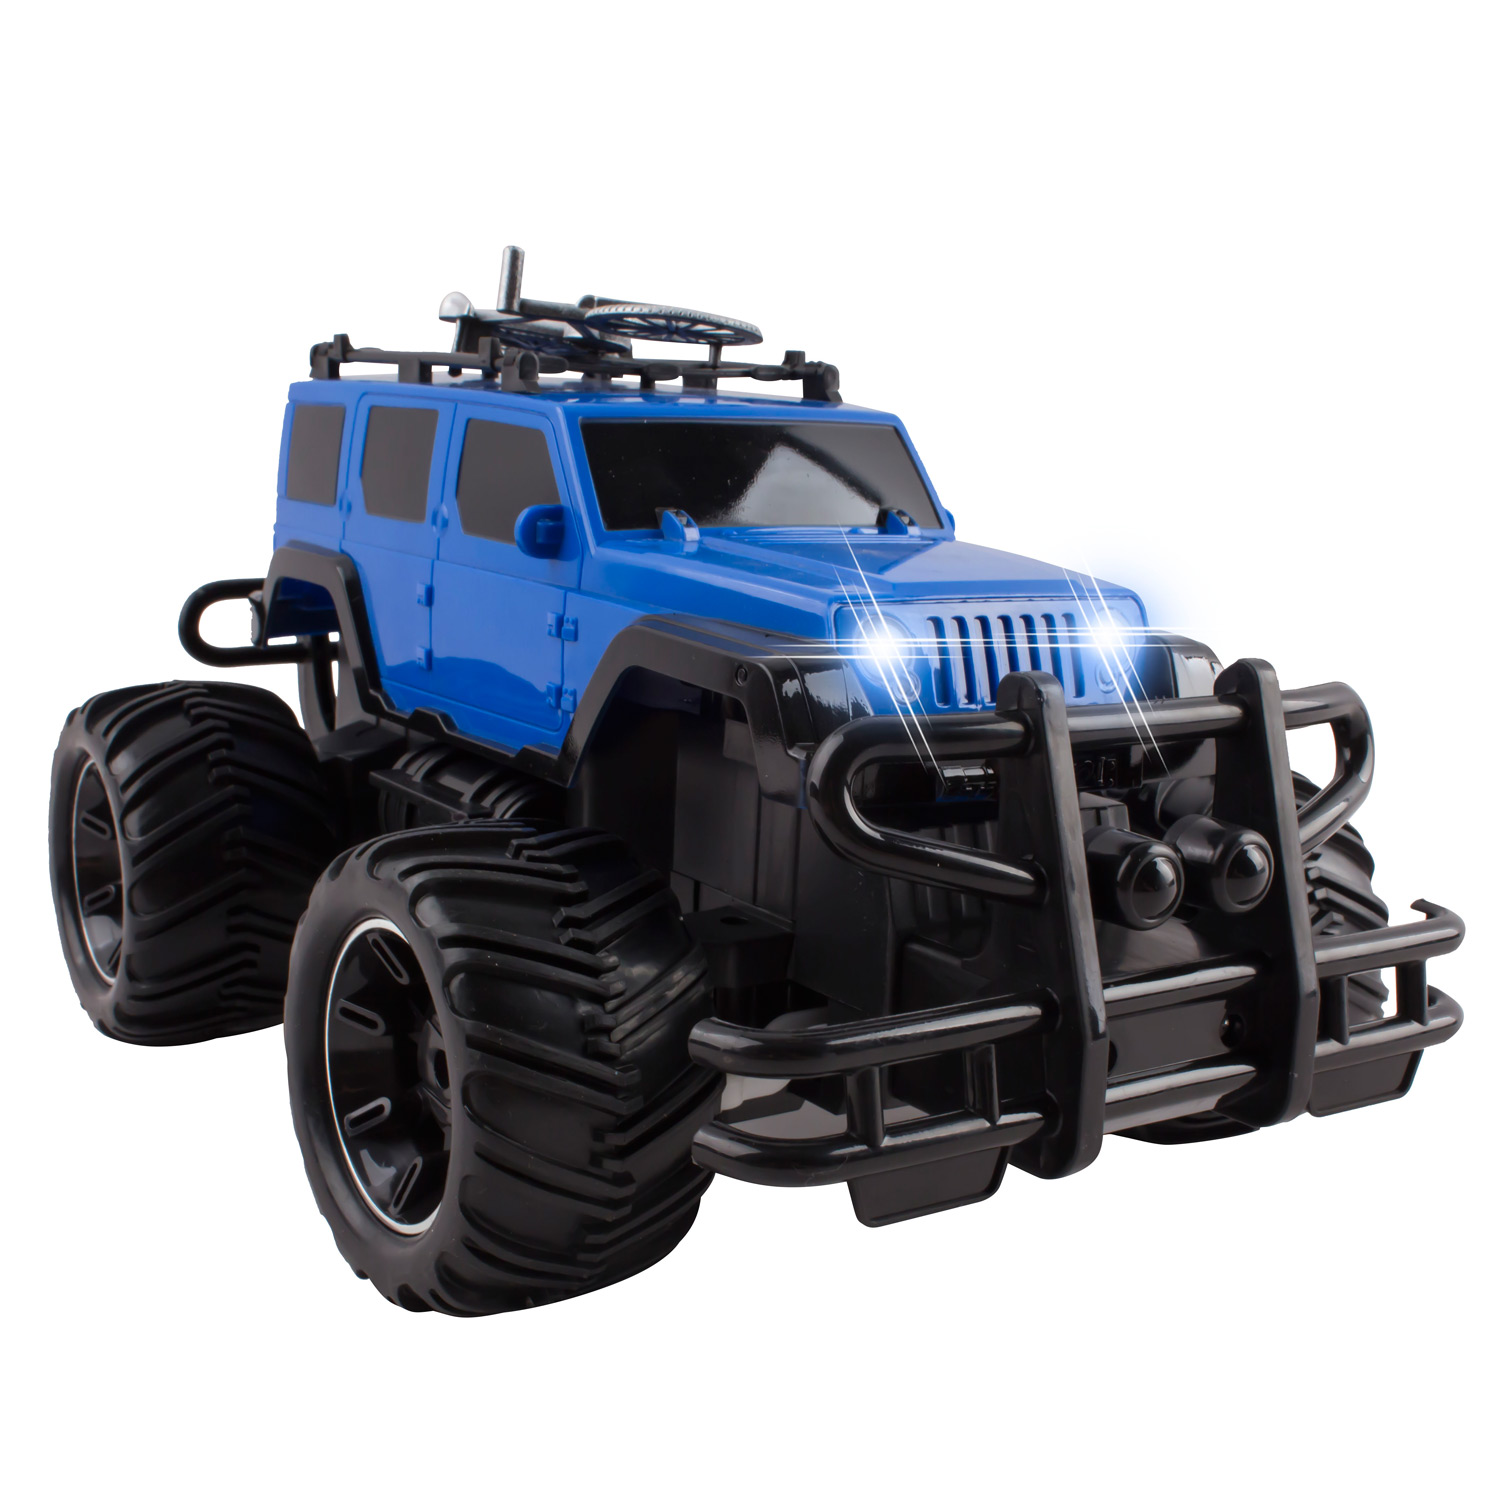 RC Truck Jeep Big Wheel Monster Remote Control Car With LED Headlights Ready to Run Includes Rechargeable Battery 1:16 Size Off-Road Beast Buggy Toy Blue